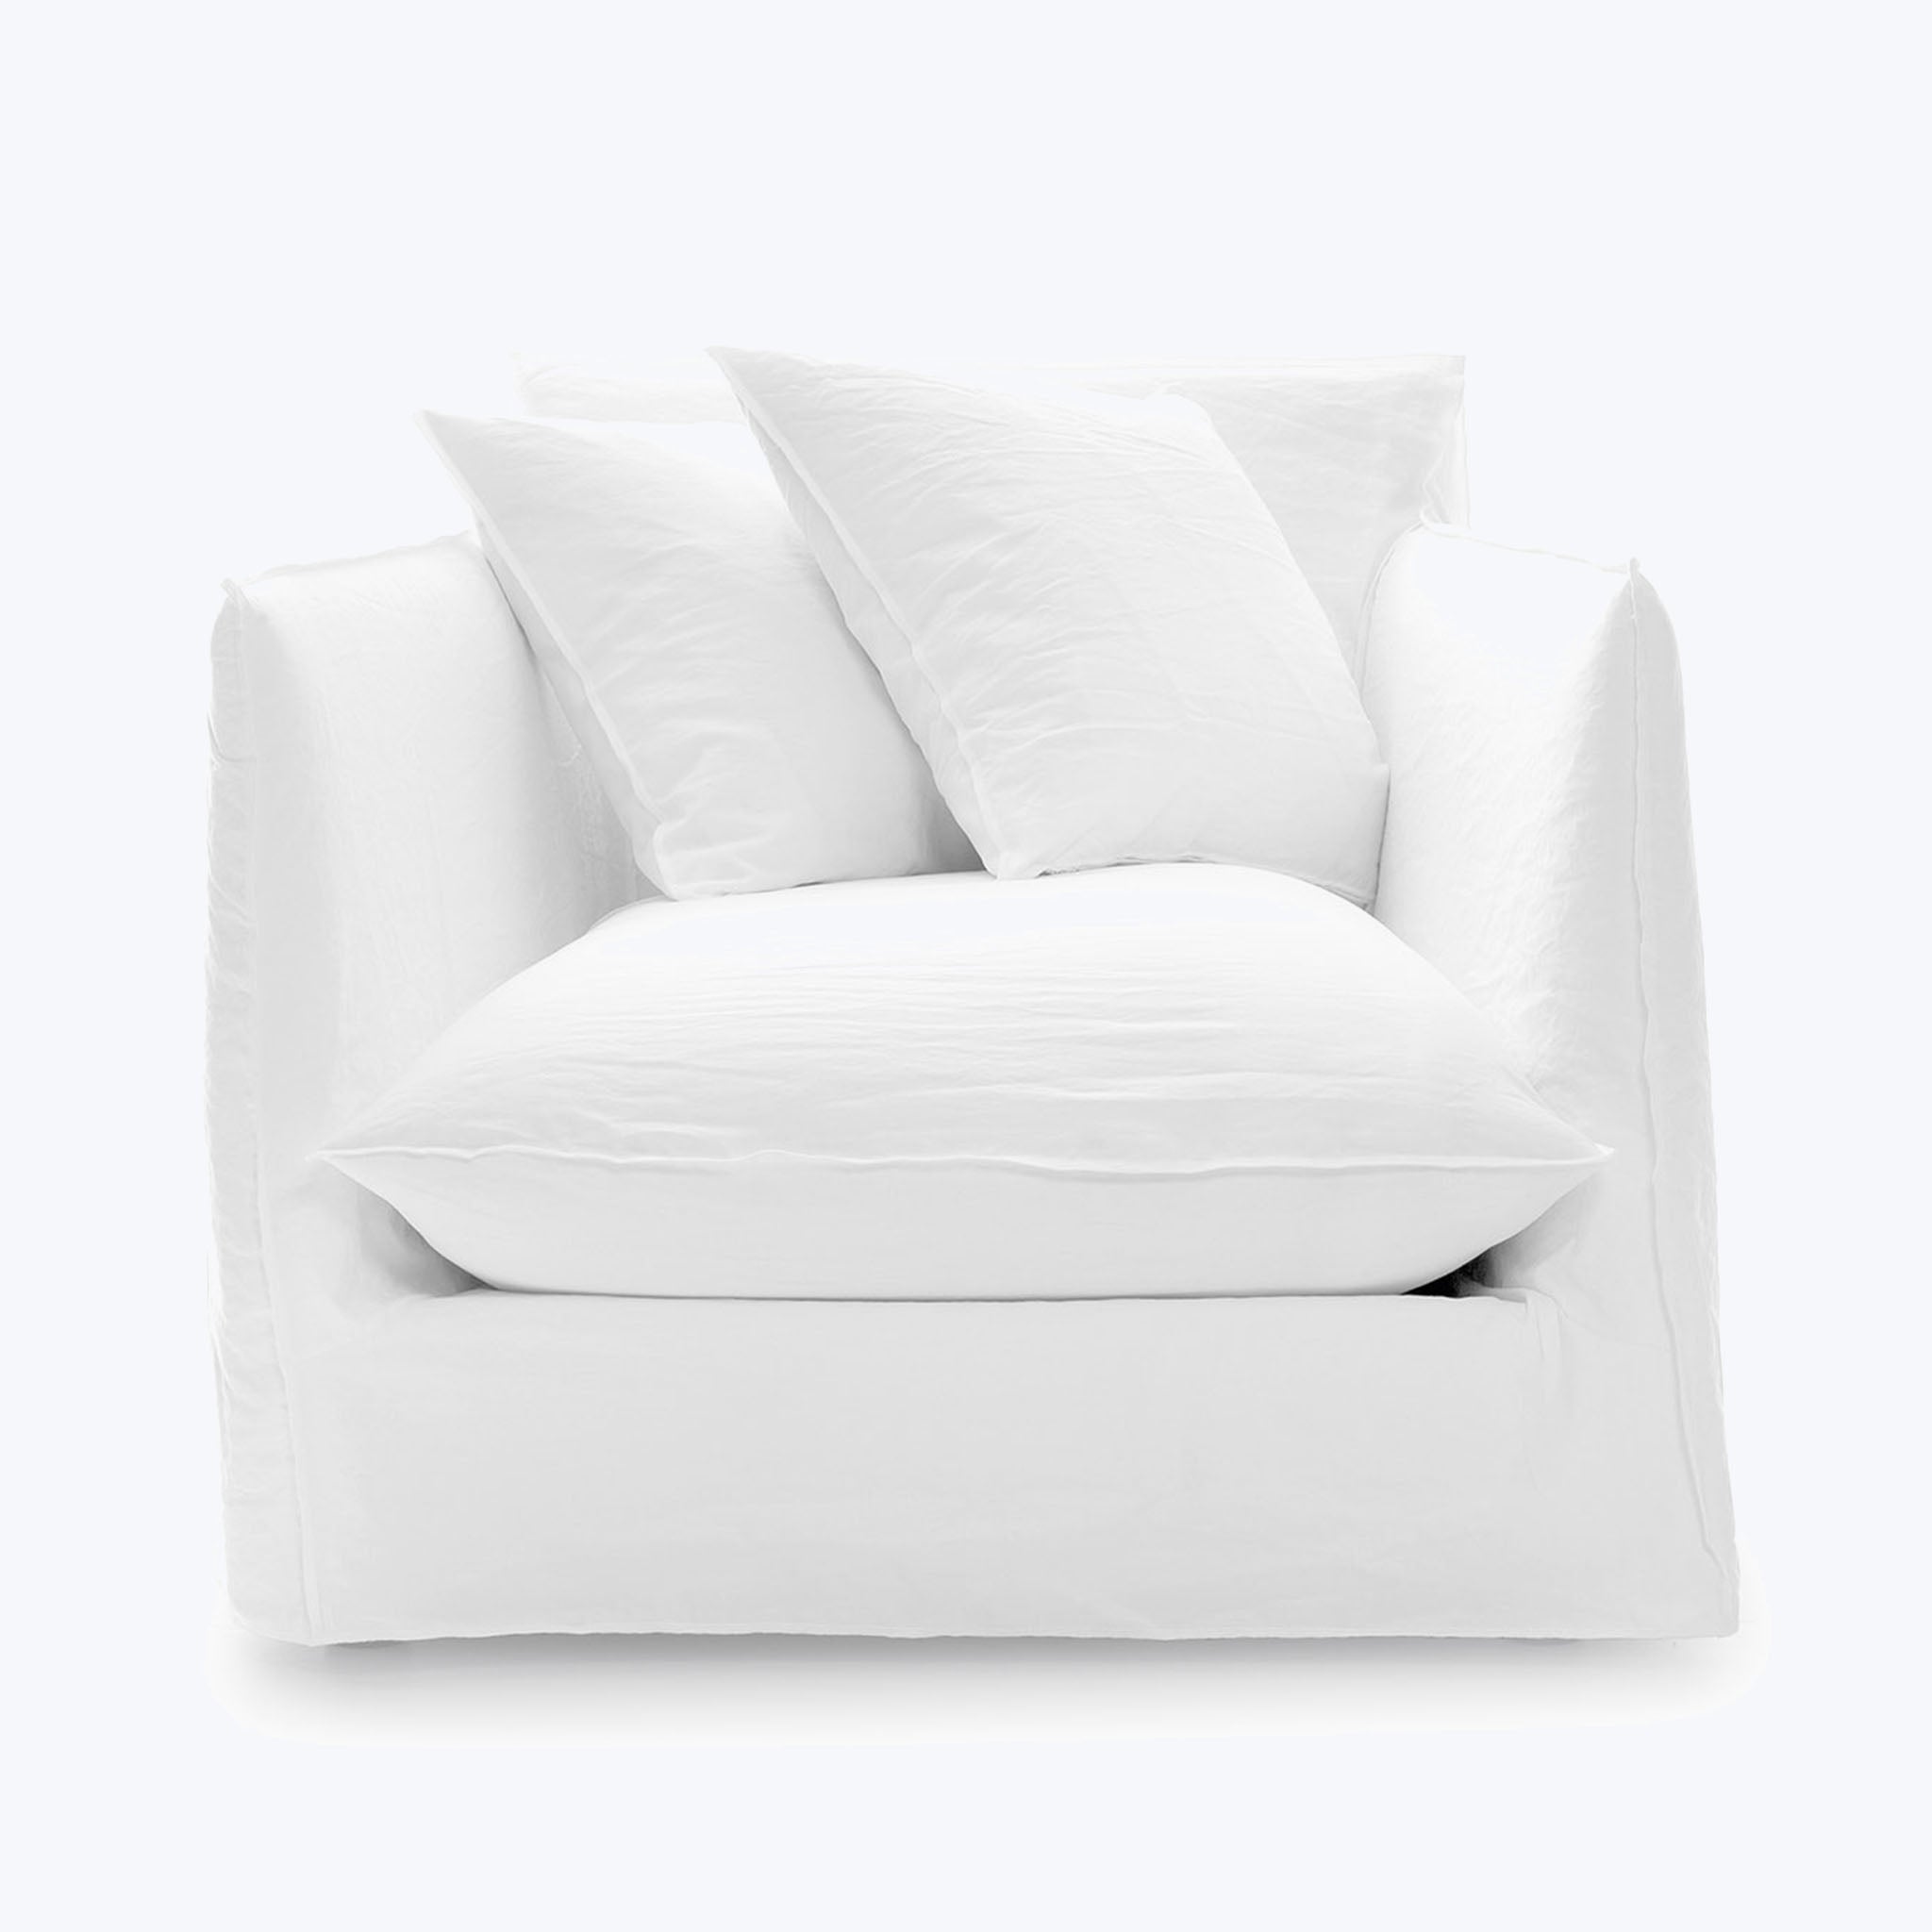 Ghost Slipcover Lounge Chair